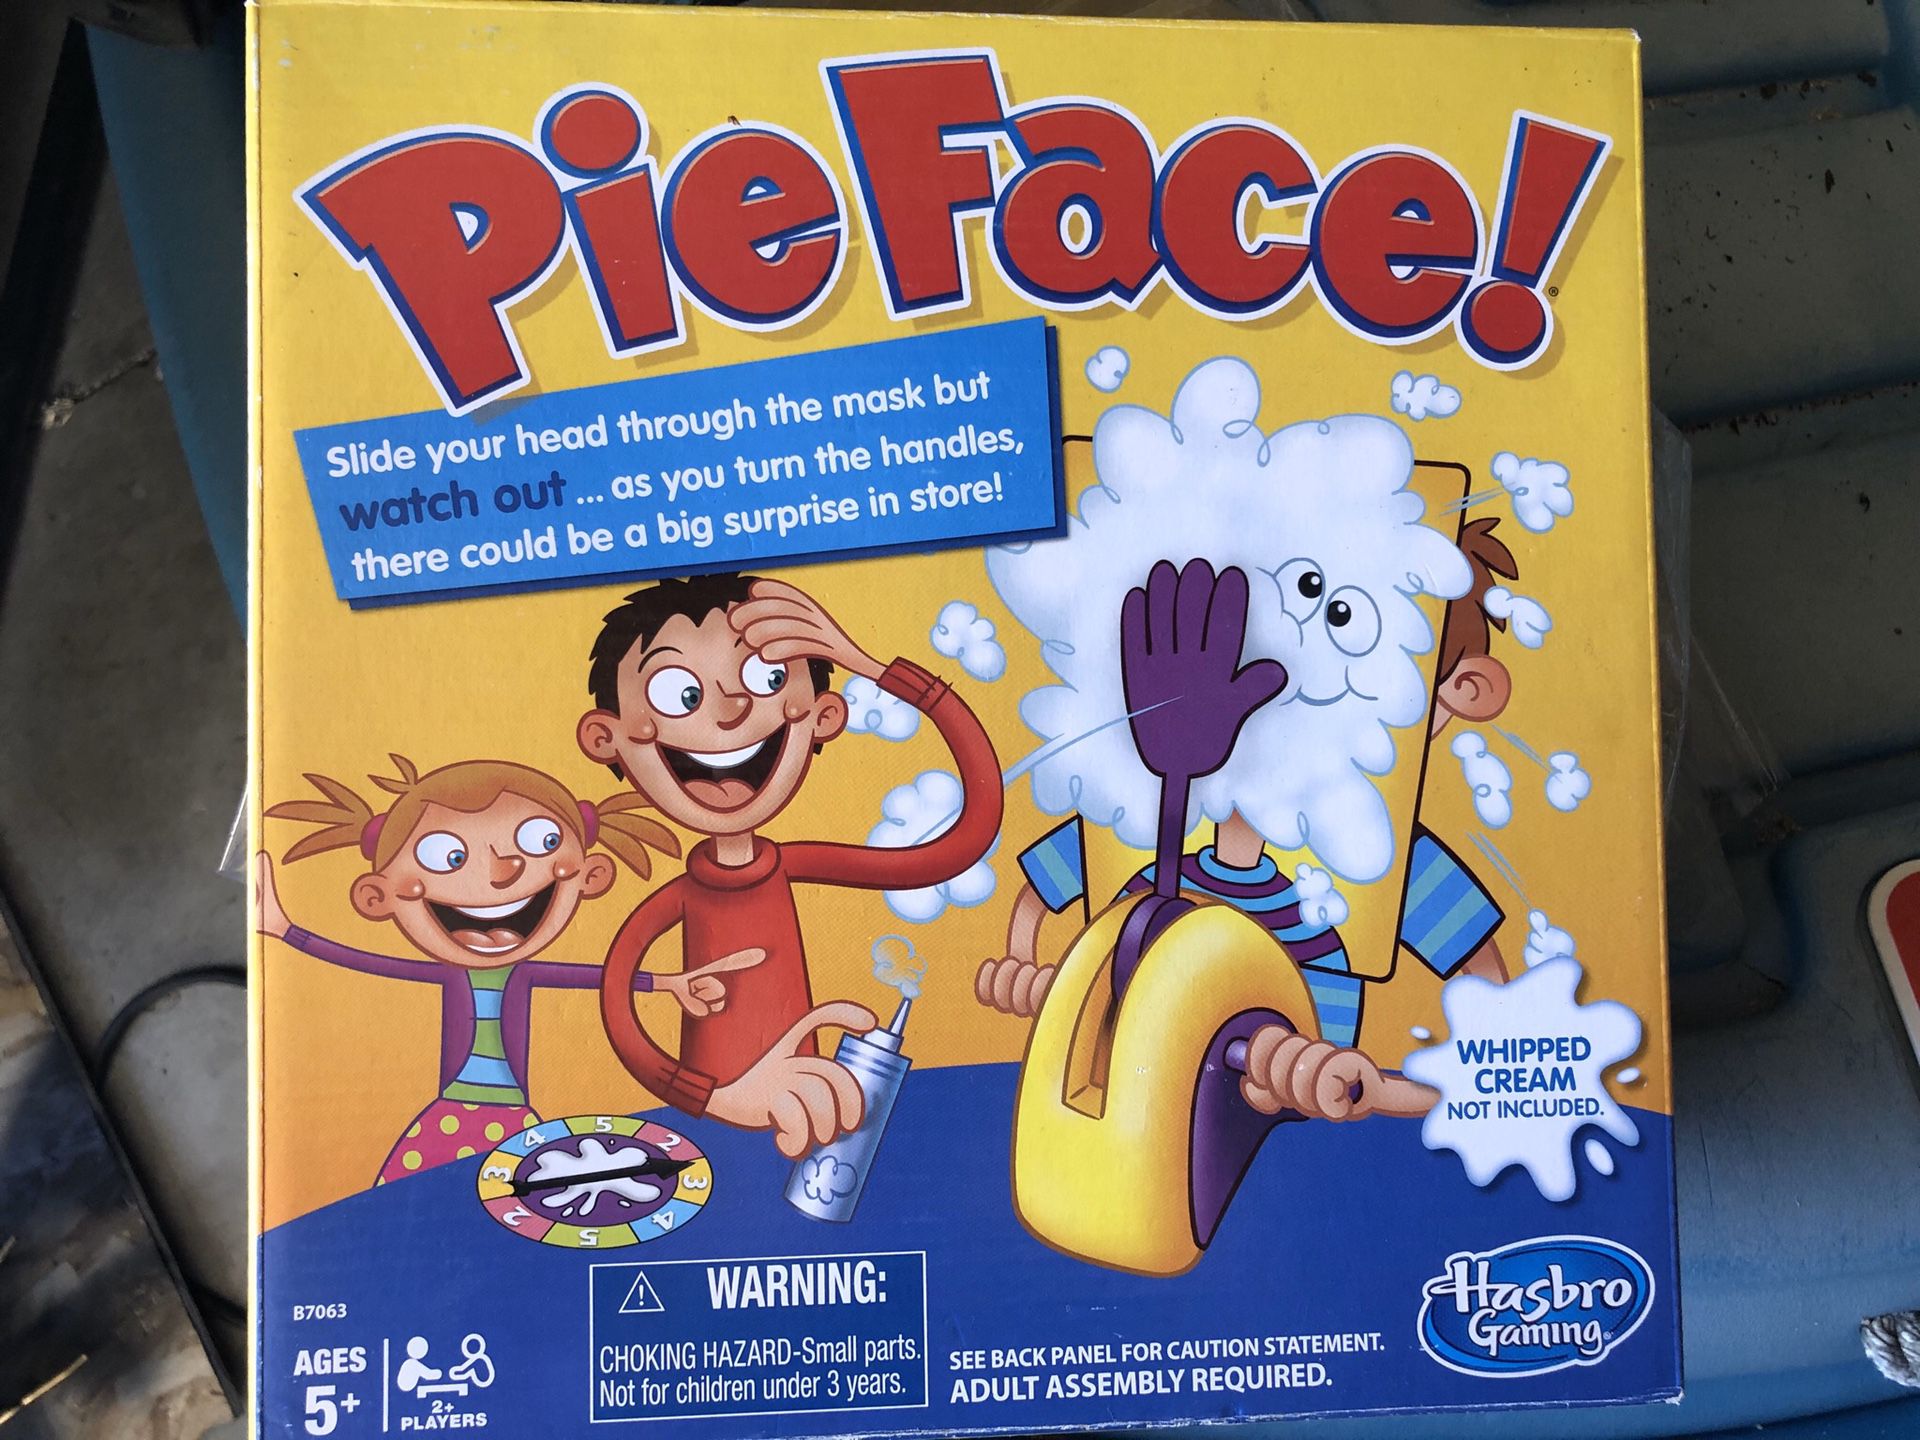 Pie Face Board Game